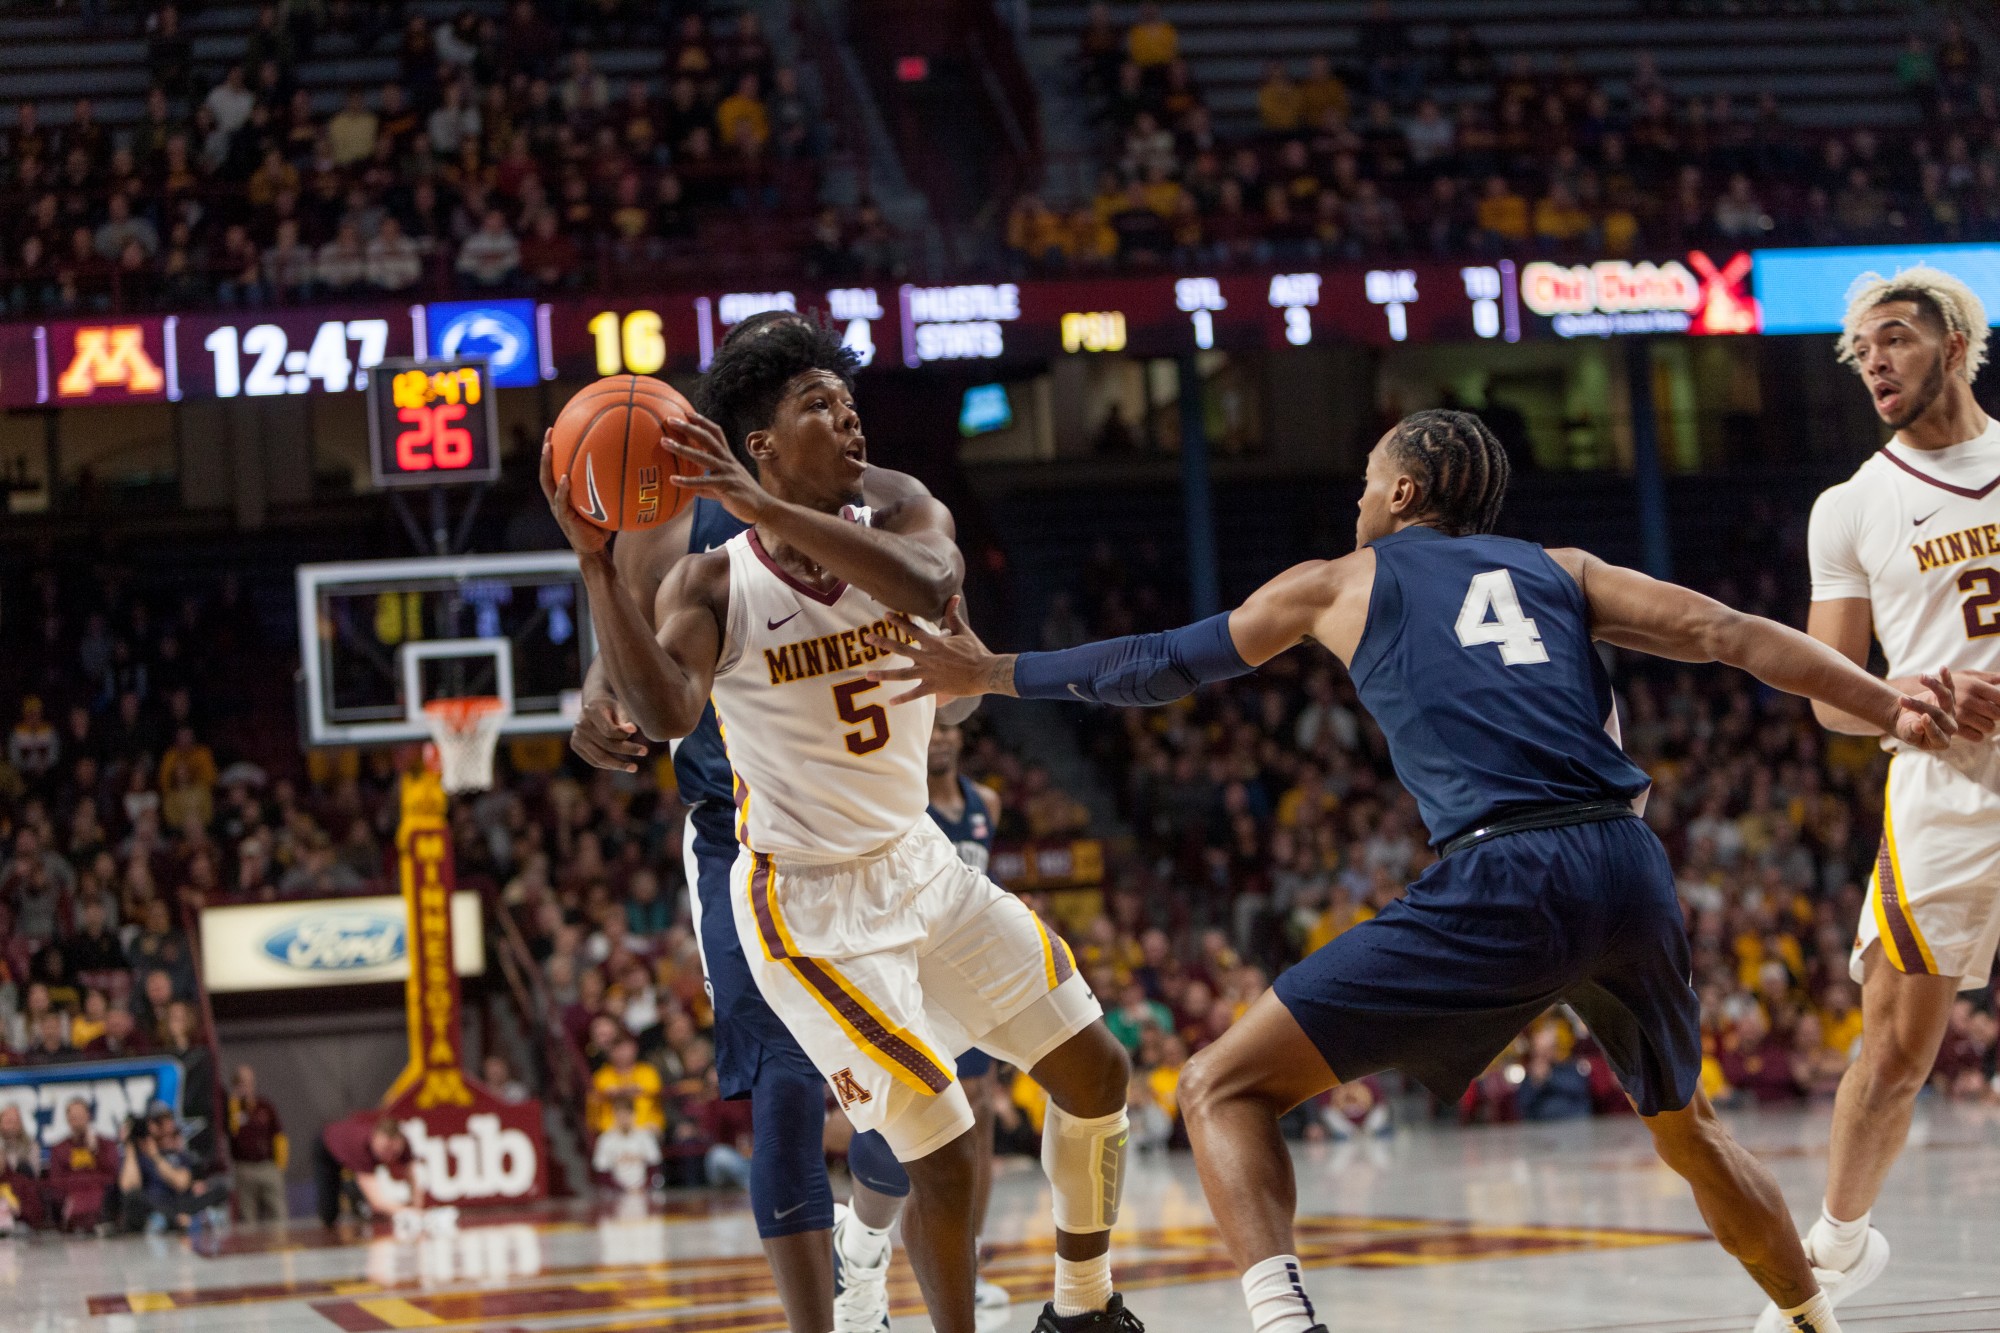 Gophers Guard Marcus Carr protects the ball from a defender at Williams Arena on Wednesday, Jan. 15.  Minnesota defeated the Penn State Nittany Lions 75-69. (Kamaan Richards / Minnesota Daily)